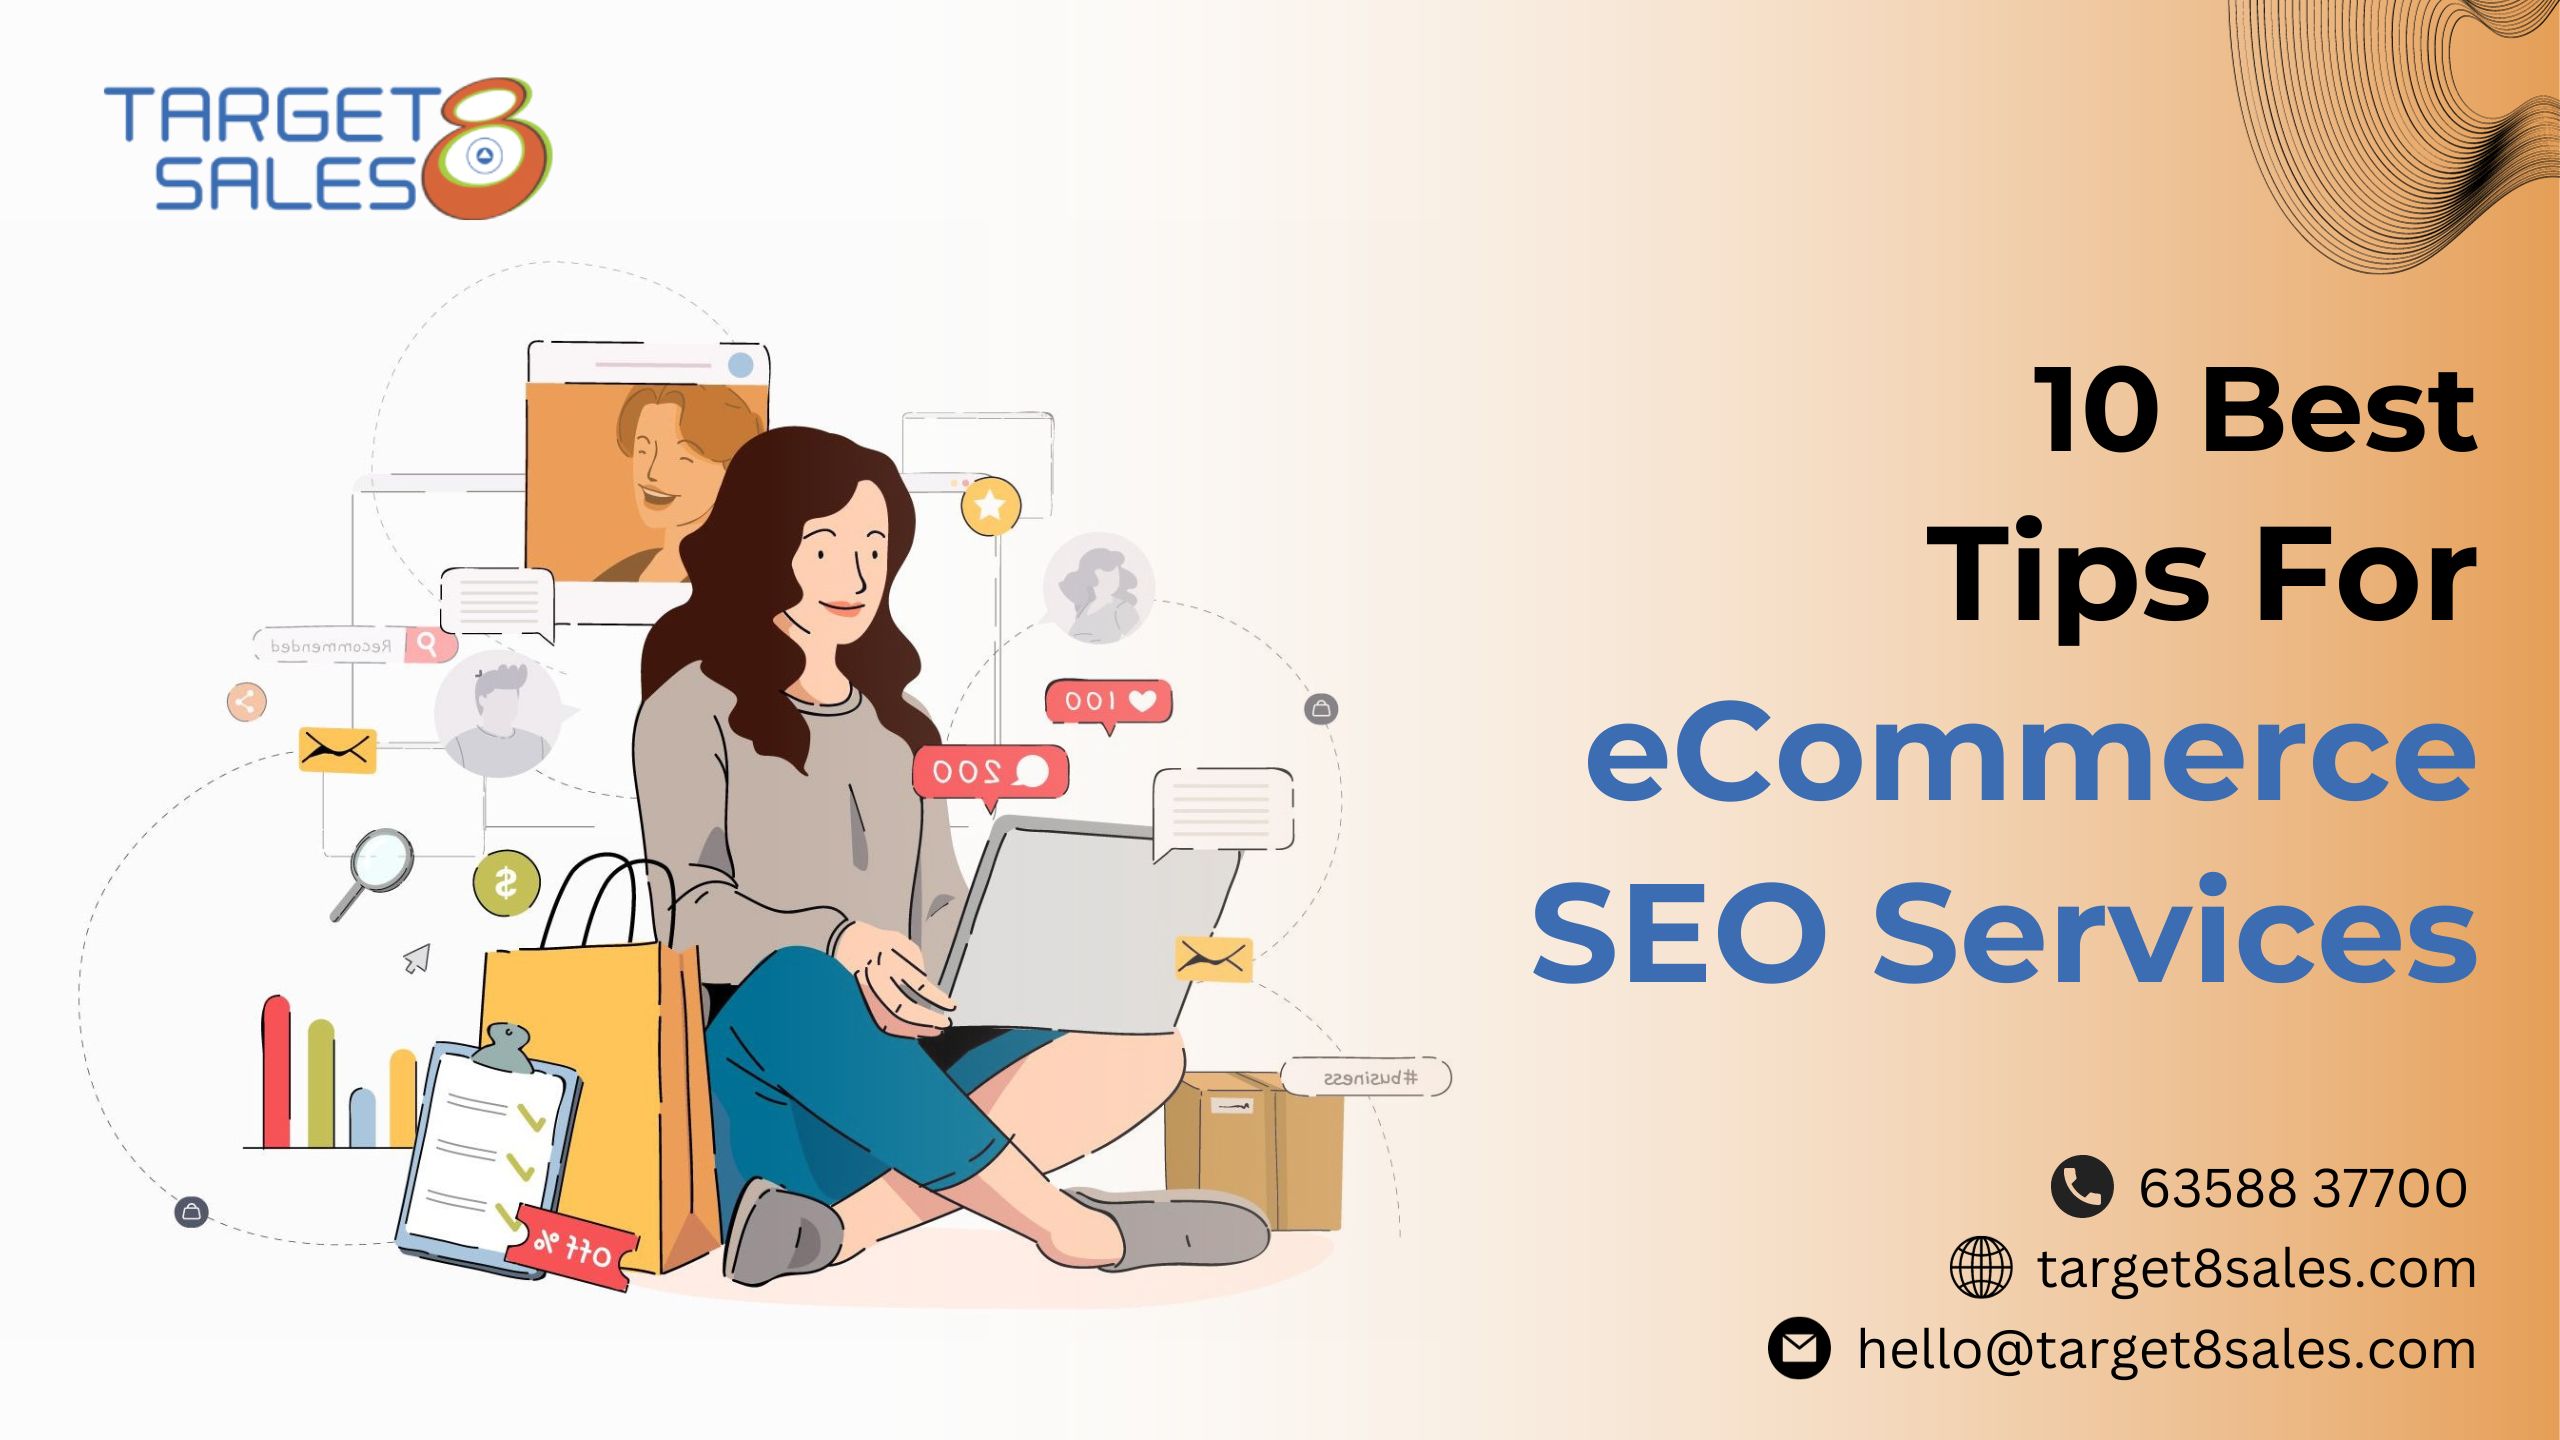 10 Best Tips for eCommerce SEO Services for Your Online Business